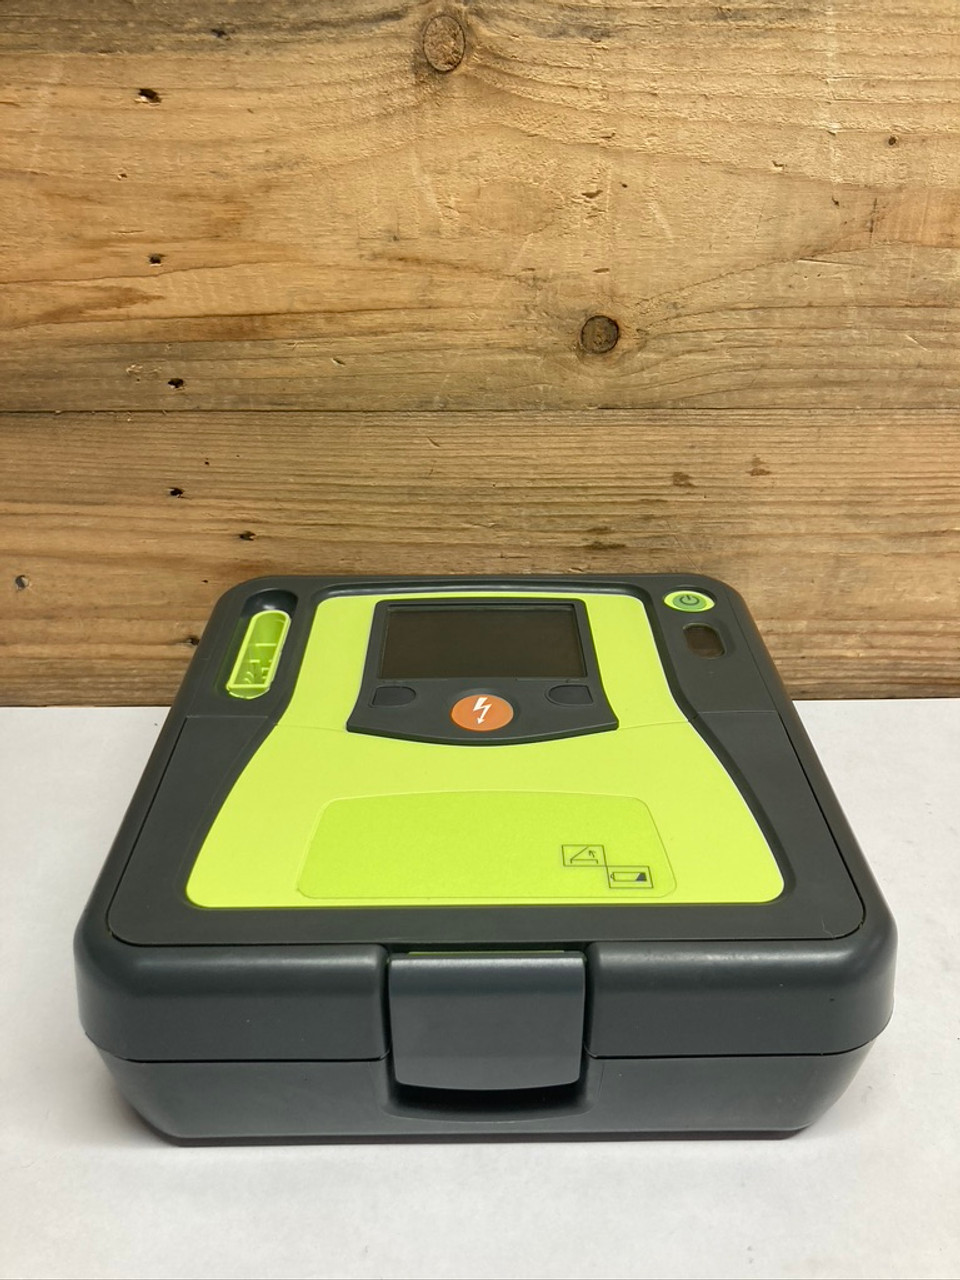 Zoll AED Pro External Defibrillator w/ EKG Cable